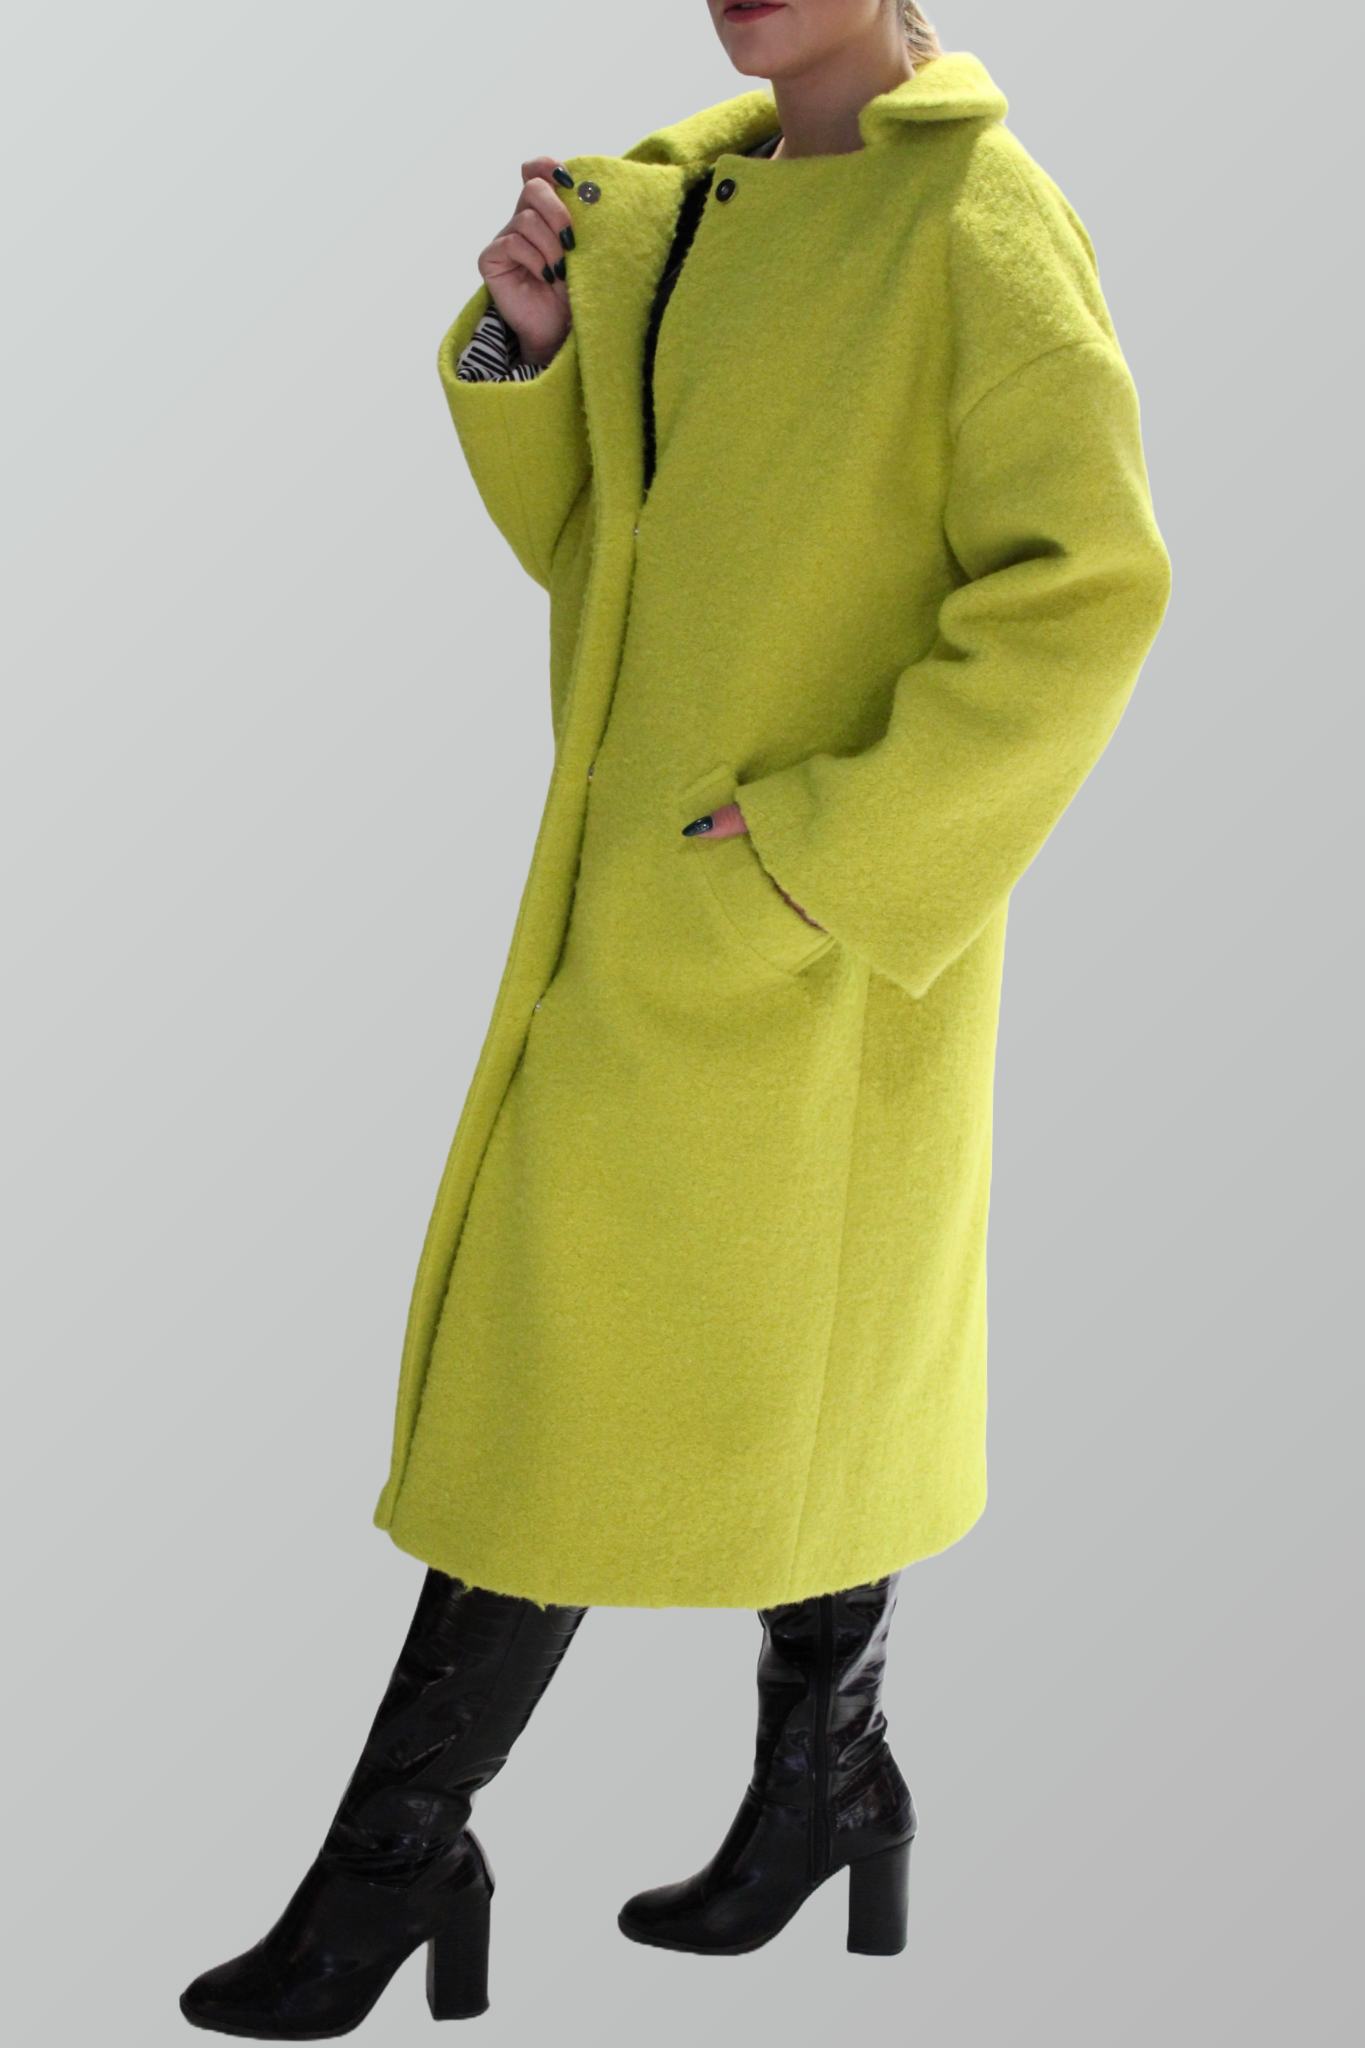 Wool Coat in Lime green with long sleeves, pockets and magnetic-button fastening.